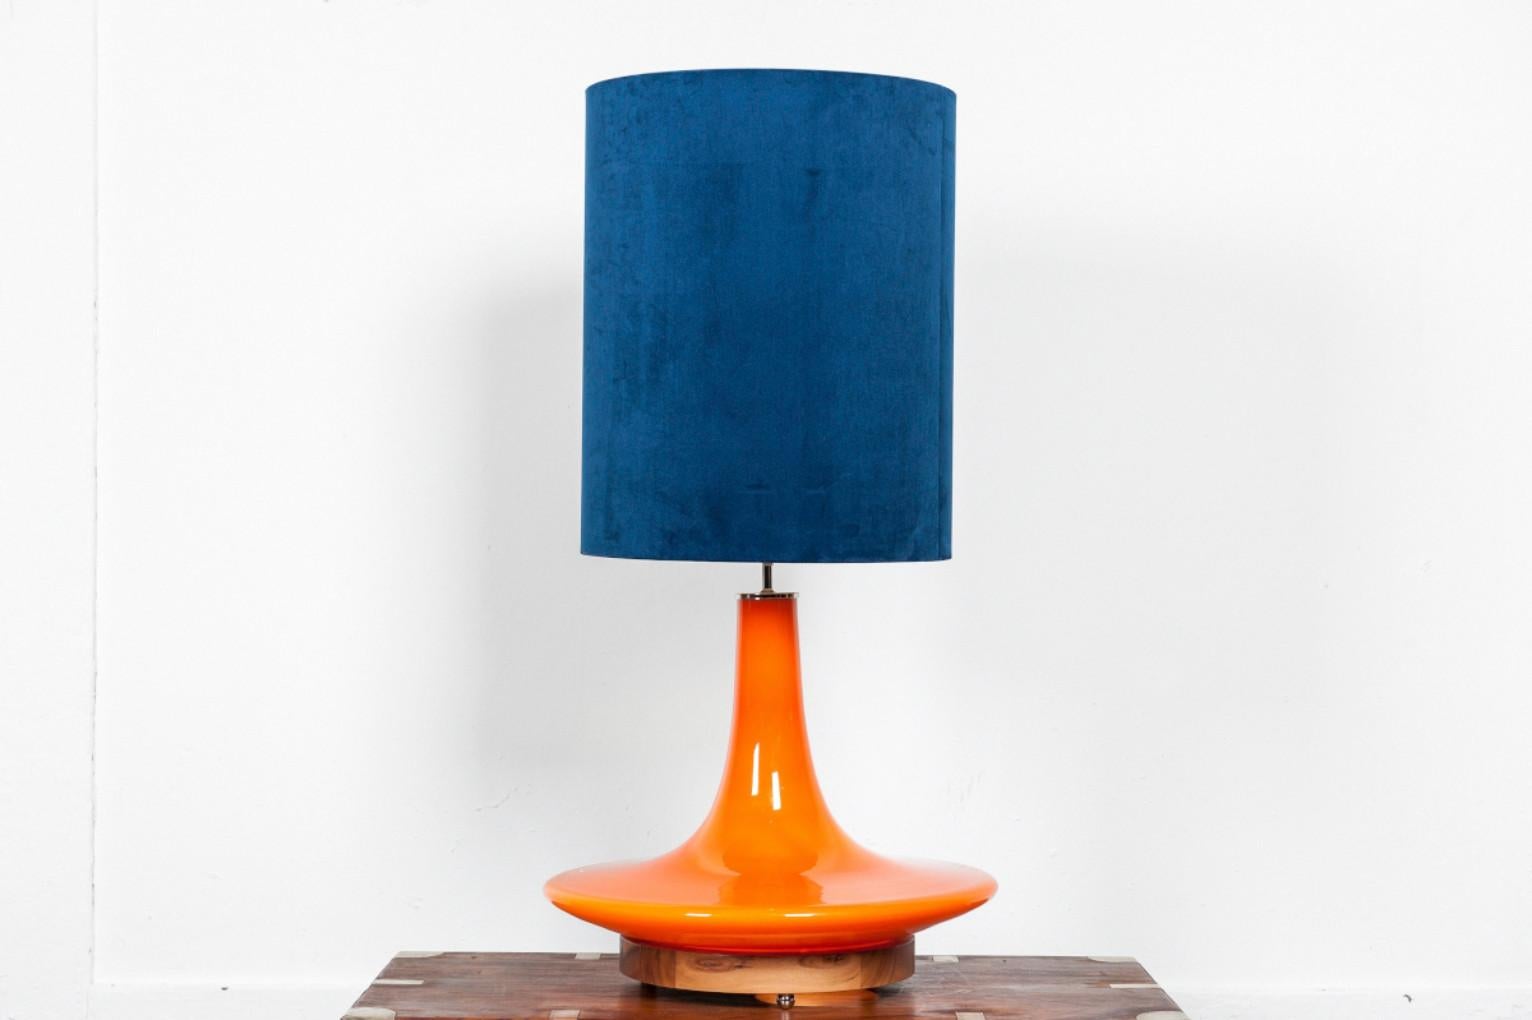 Large orange glass table lamp designed by Peill & Putzler, Germany.
This Company created so many beautiful designs..
This 50 cm diamter model was the largest in this model range.
This used to be a pendant lamp. A professional Lamp restorer has